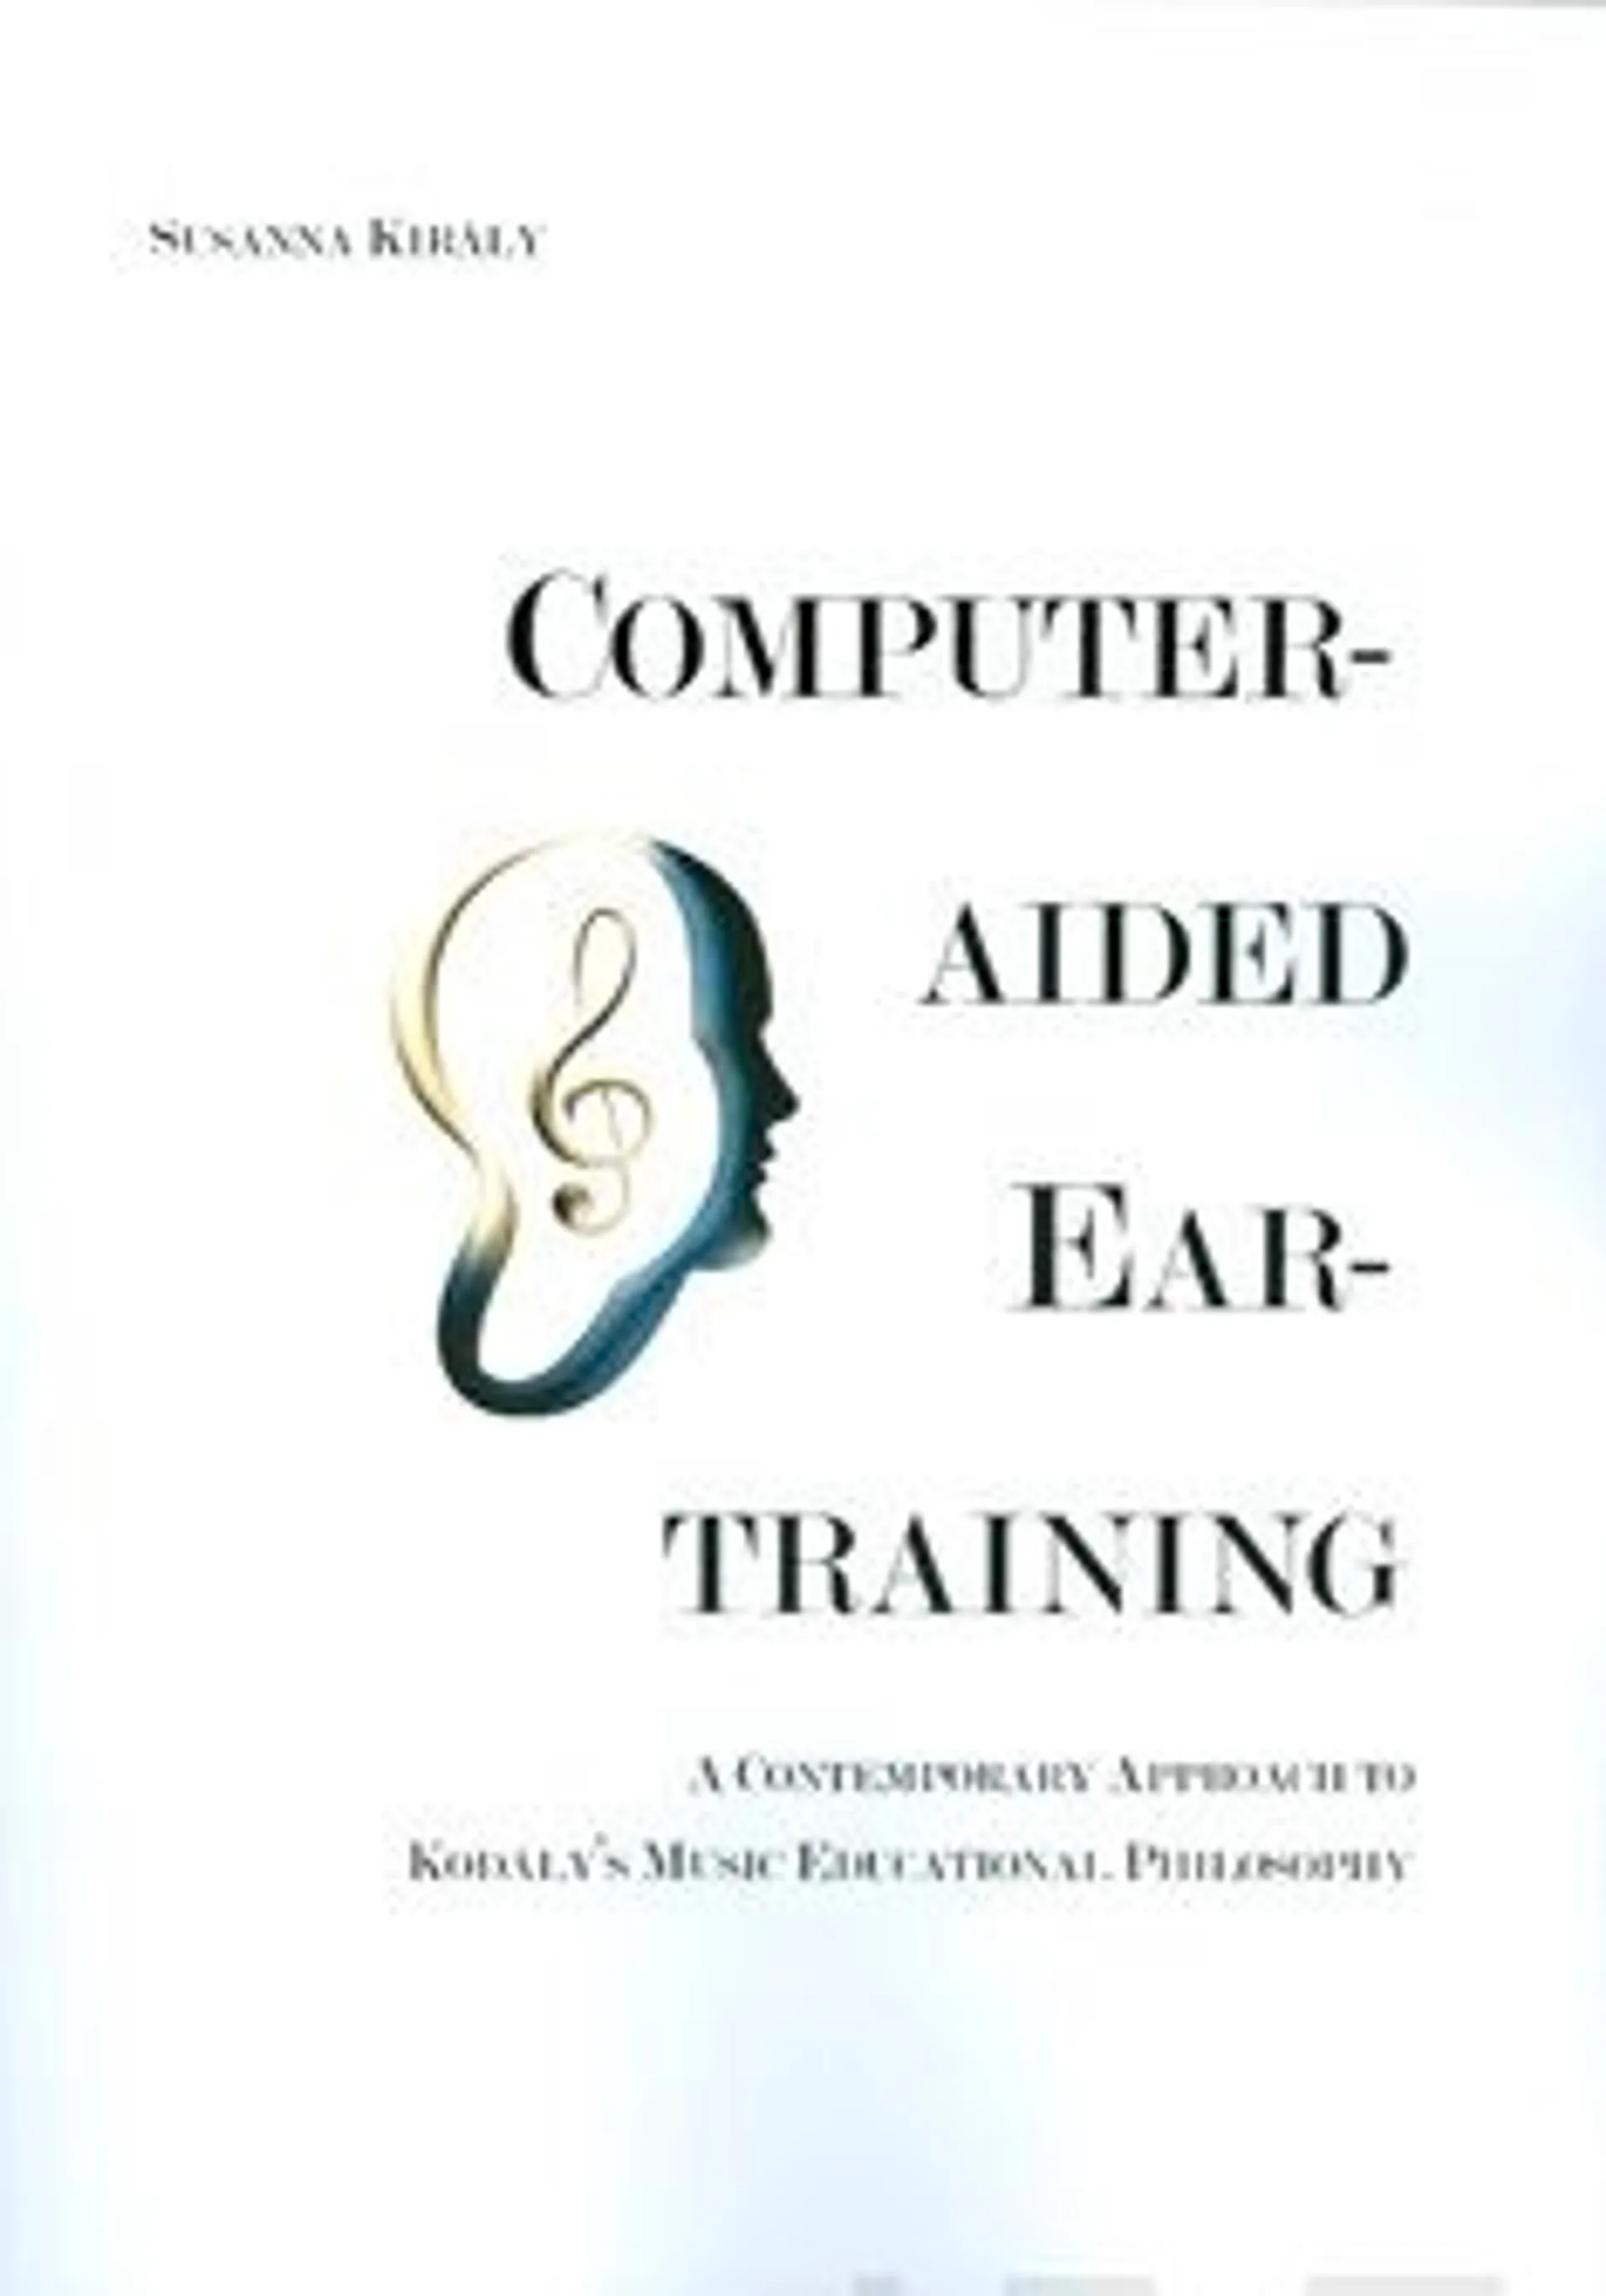 Kiraly, Computer-aided Ear-training